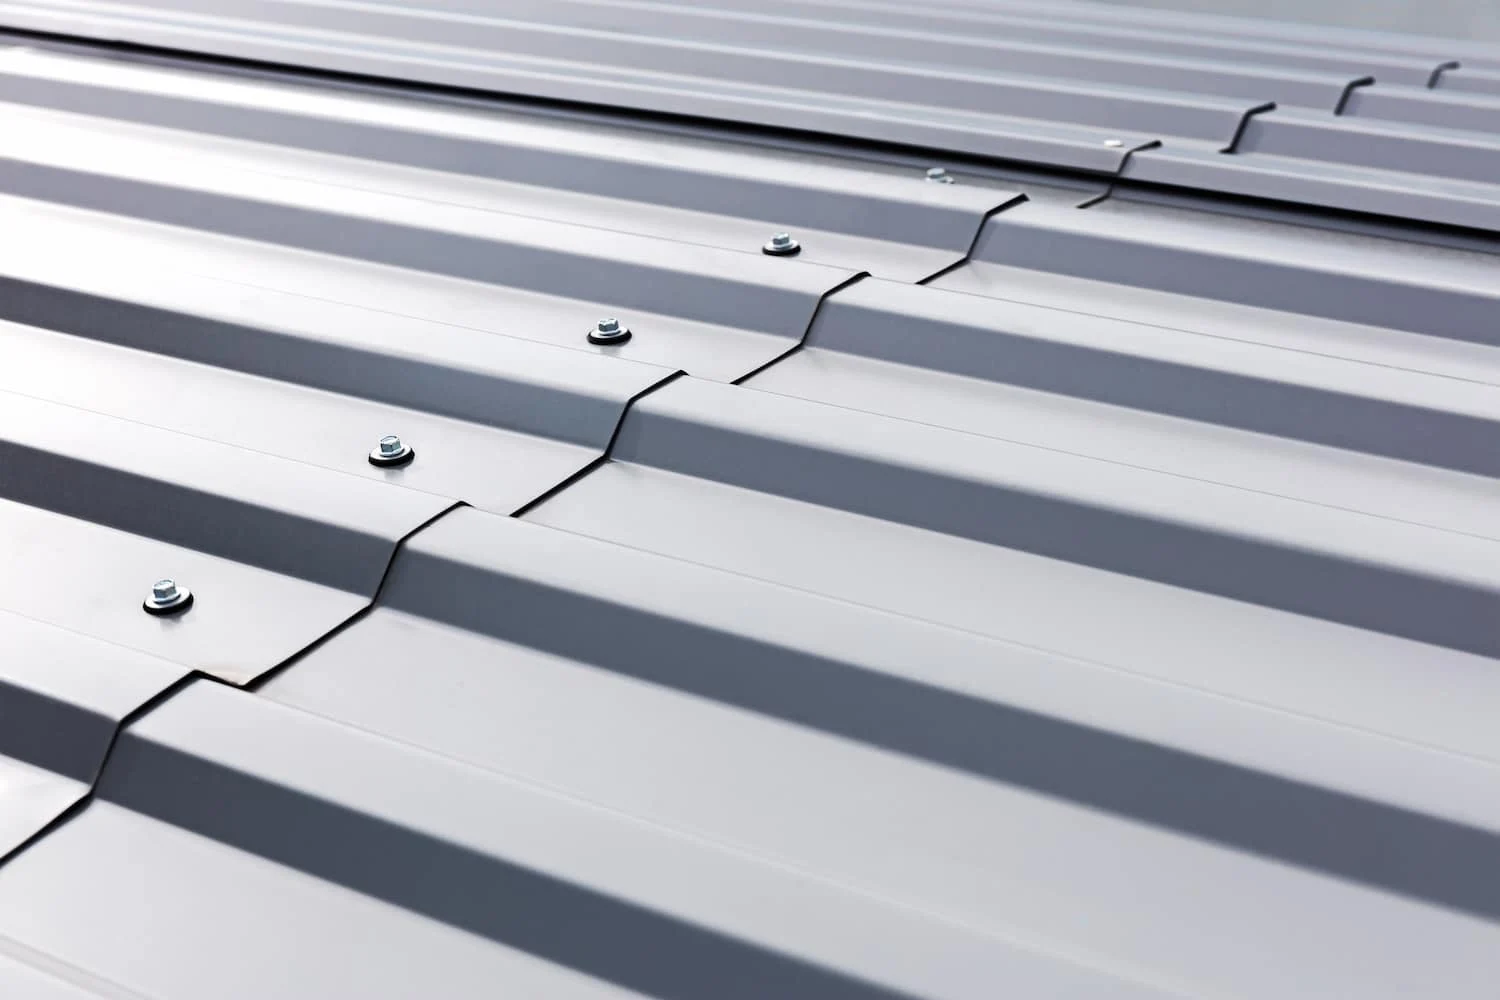 Florida Metal Roof Screw Pattern: Guidelines for Secure and Wind-Resistant Installations